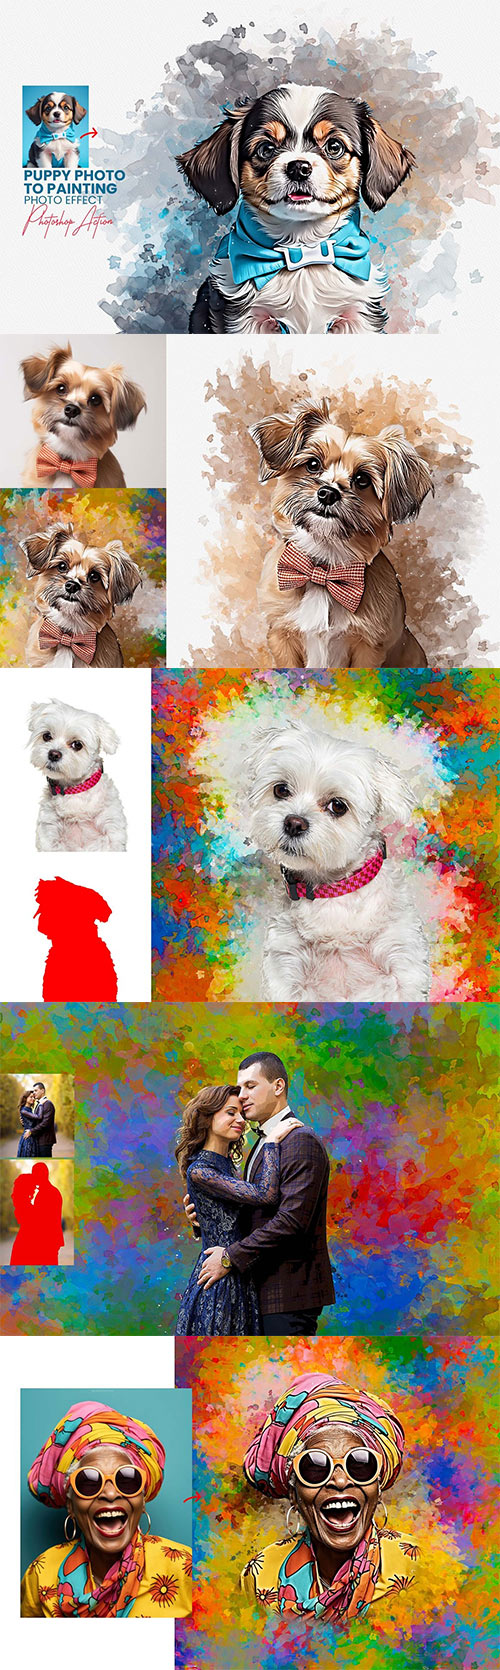 Puppy Photo to Painting Effect 92063705